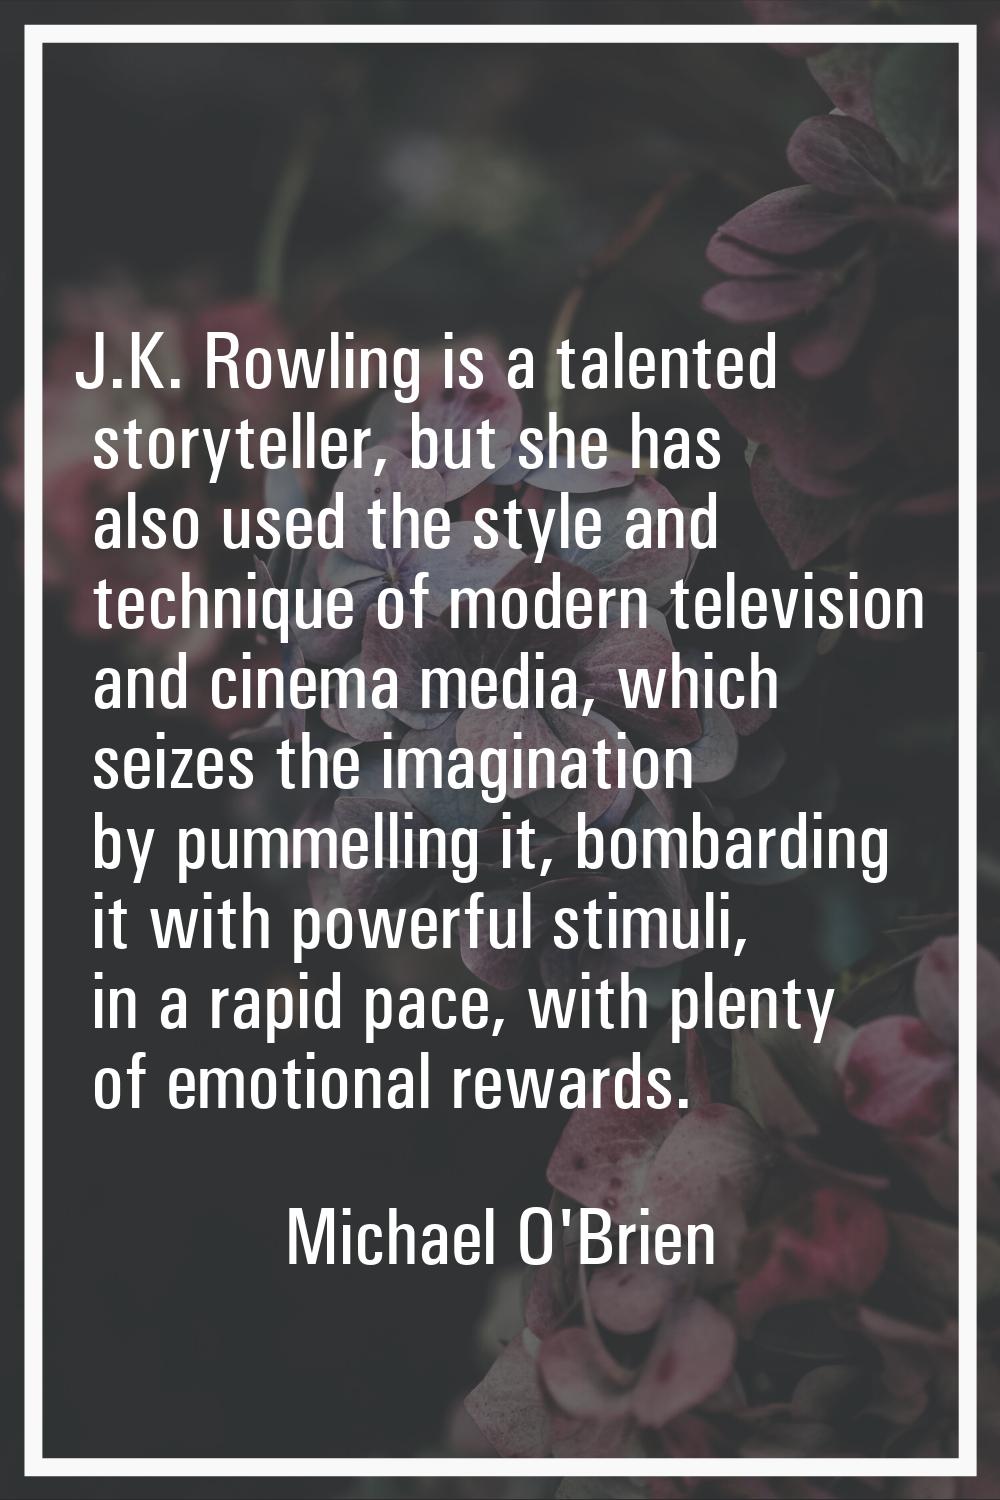 J.K. Rowling is a talented storyteller, but she has also used the style and technique of modern tel